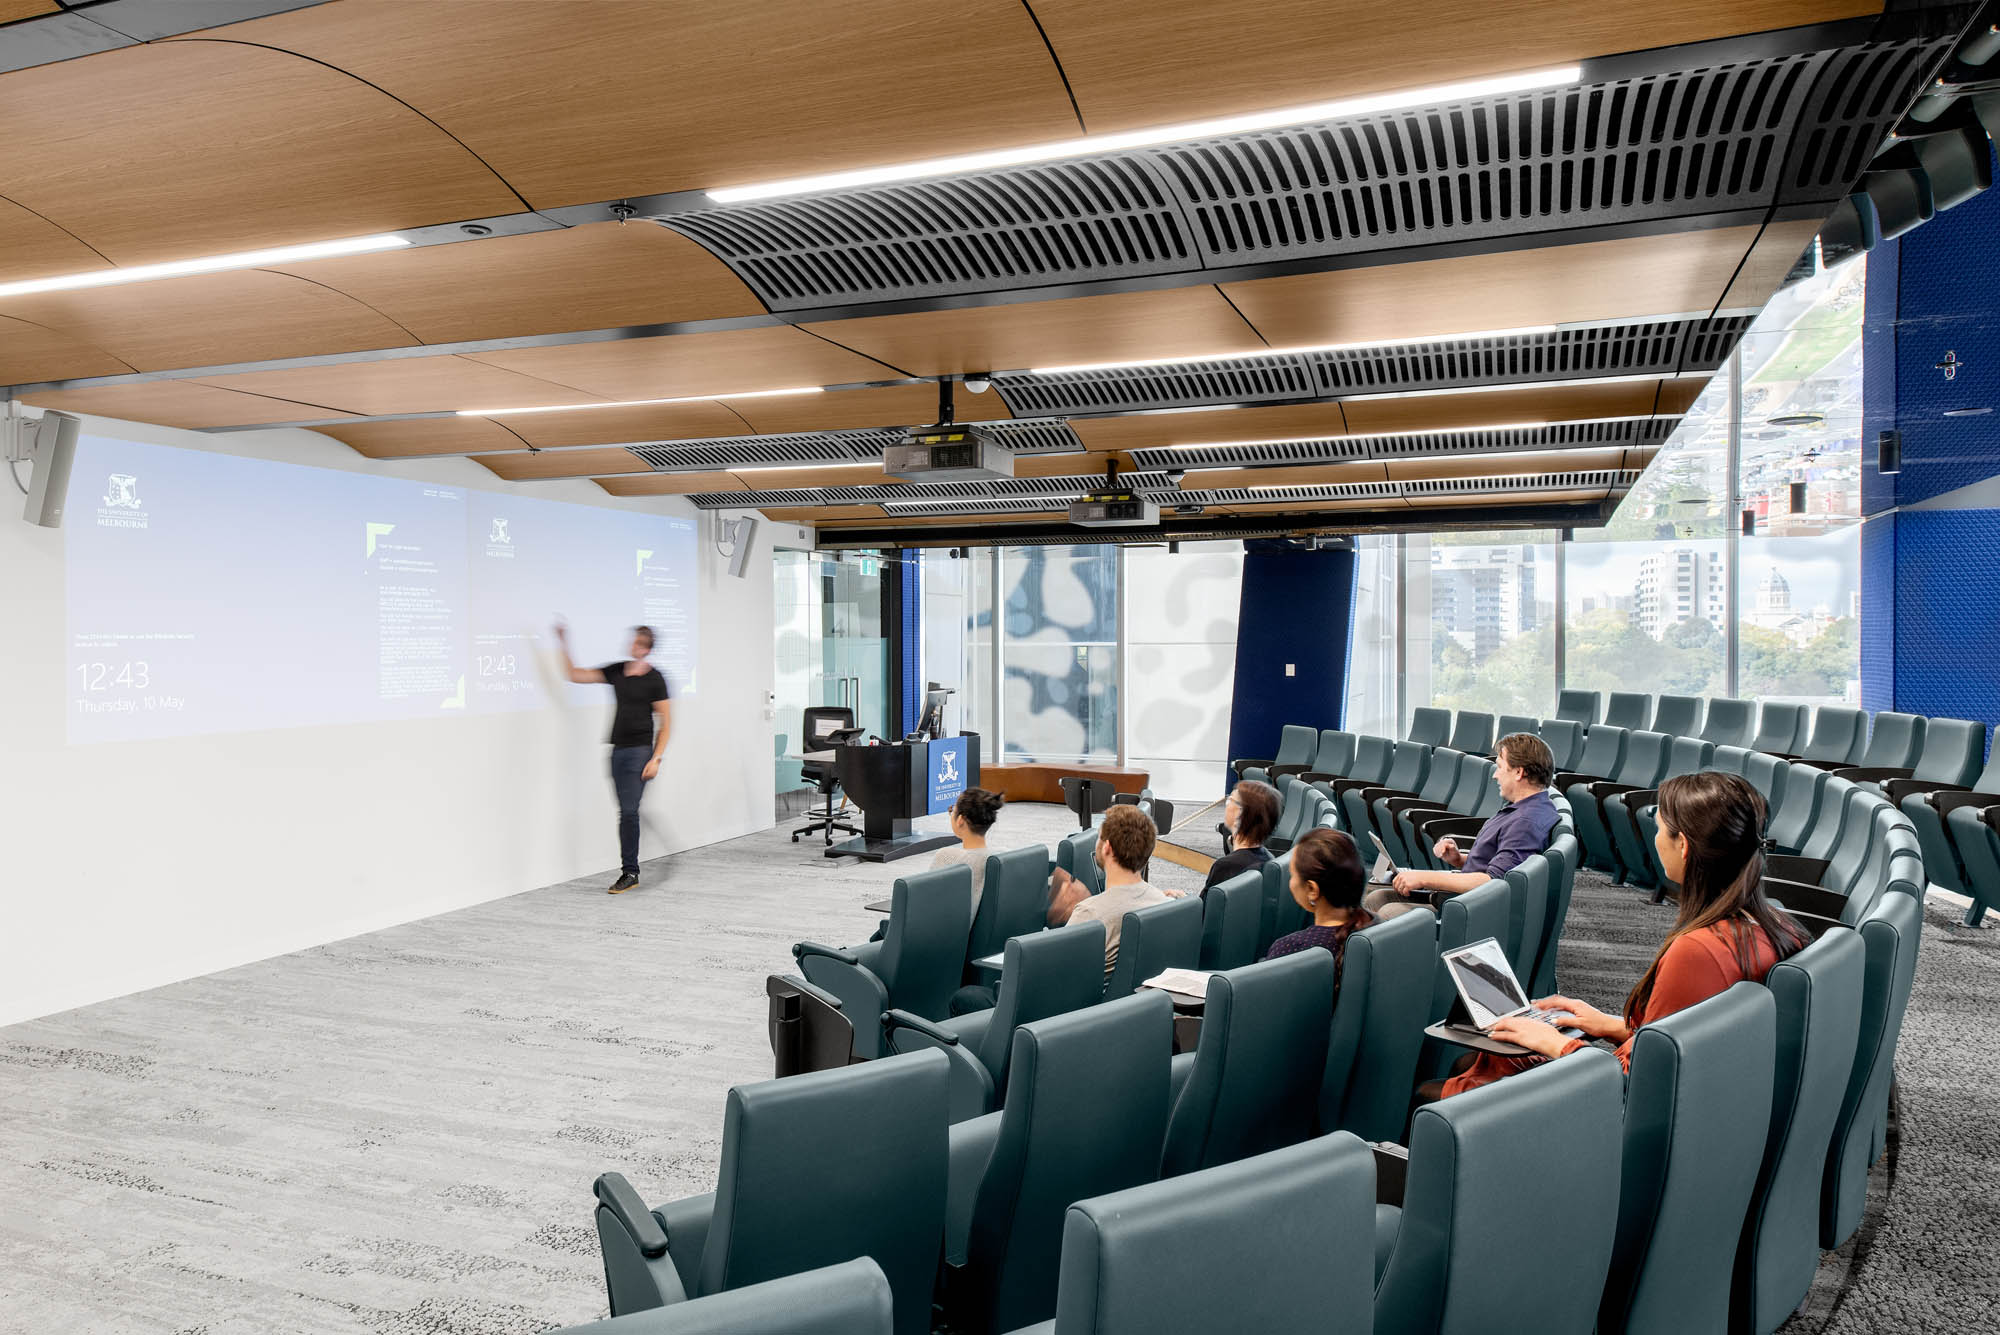 University of Melbourne Carlton lecture theatre with students and tacher